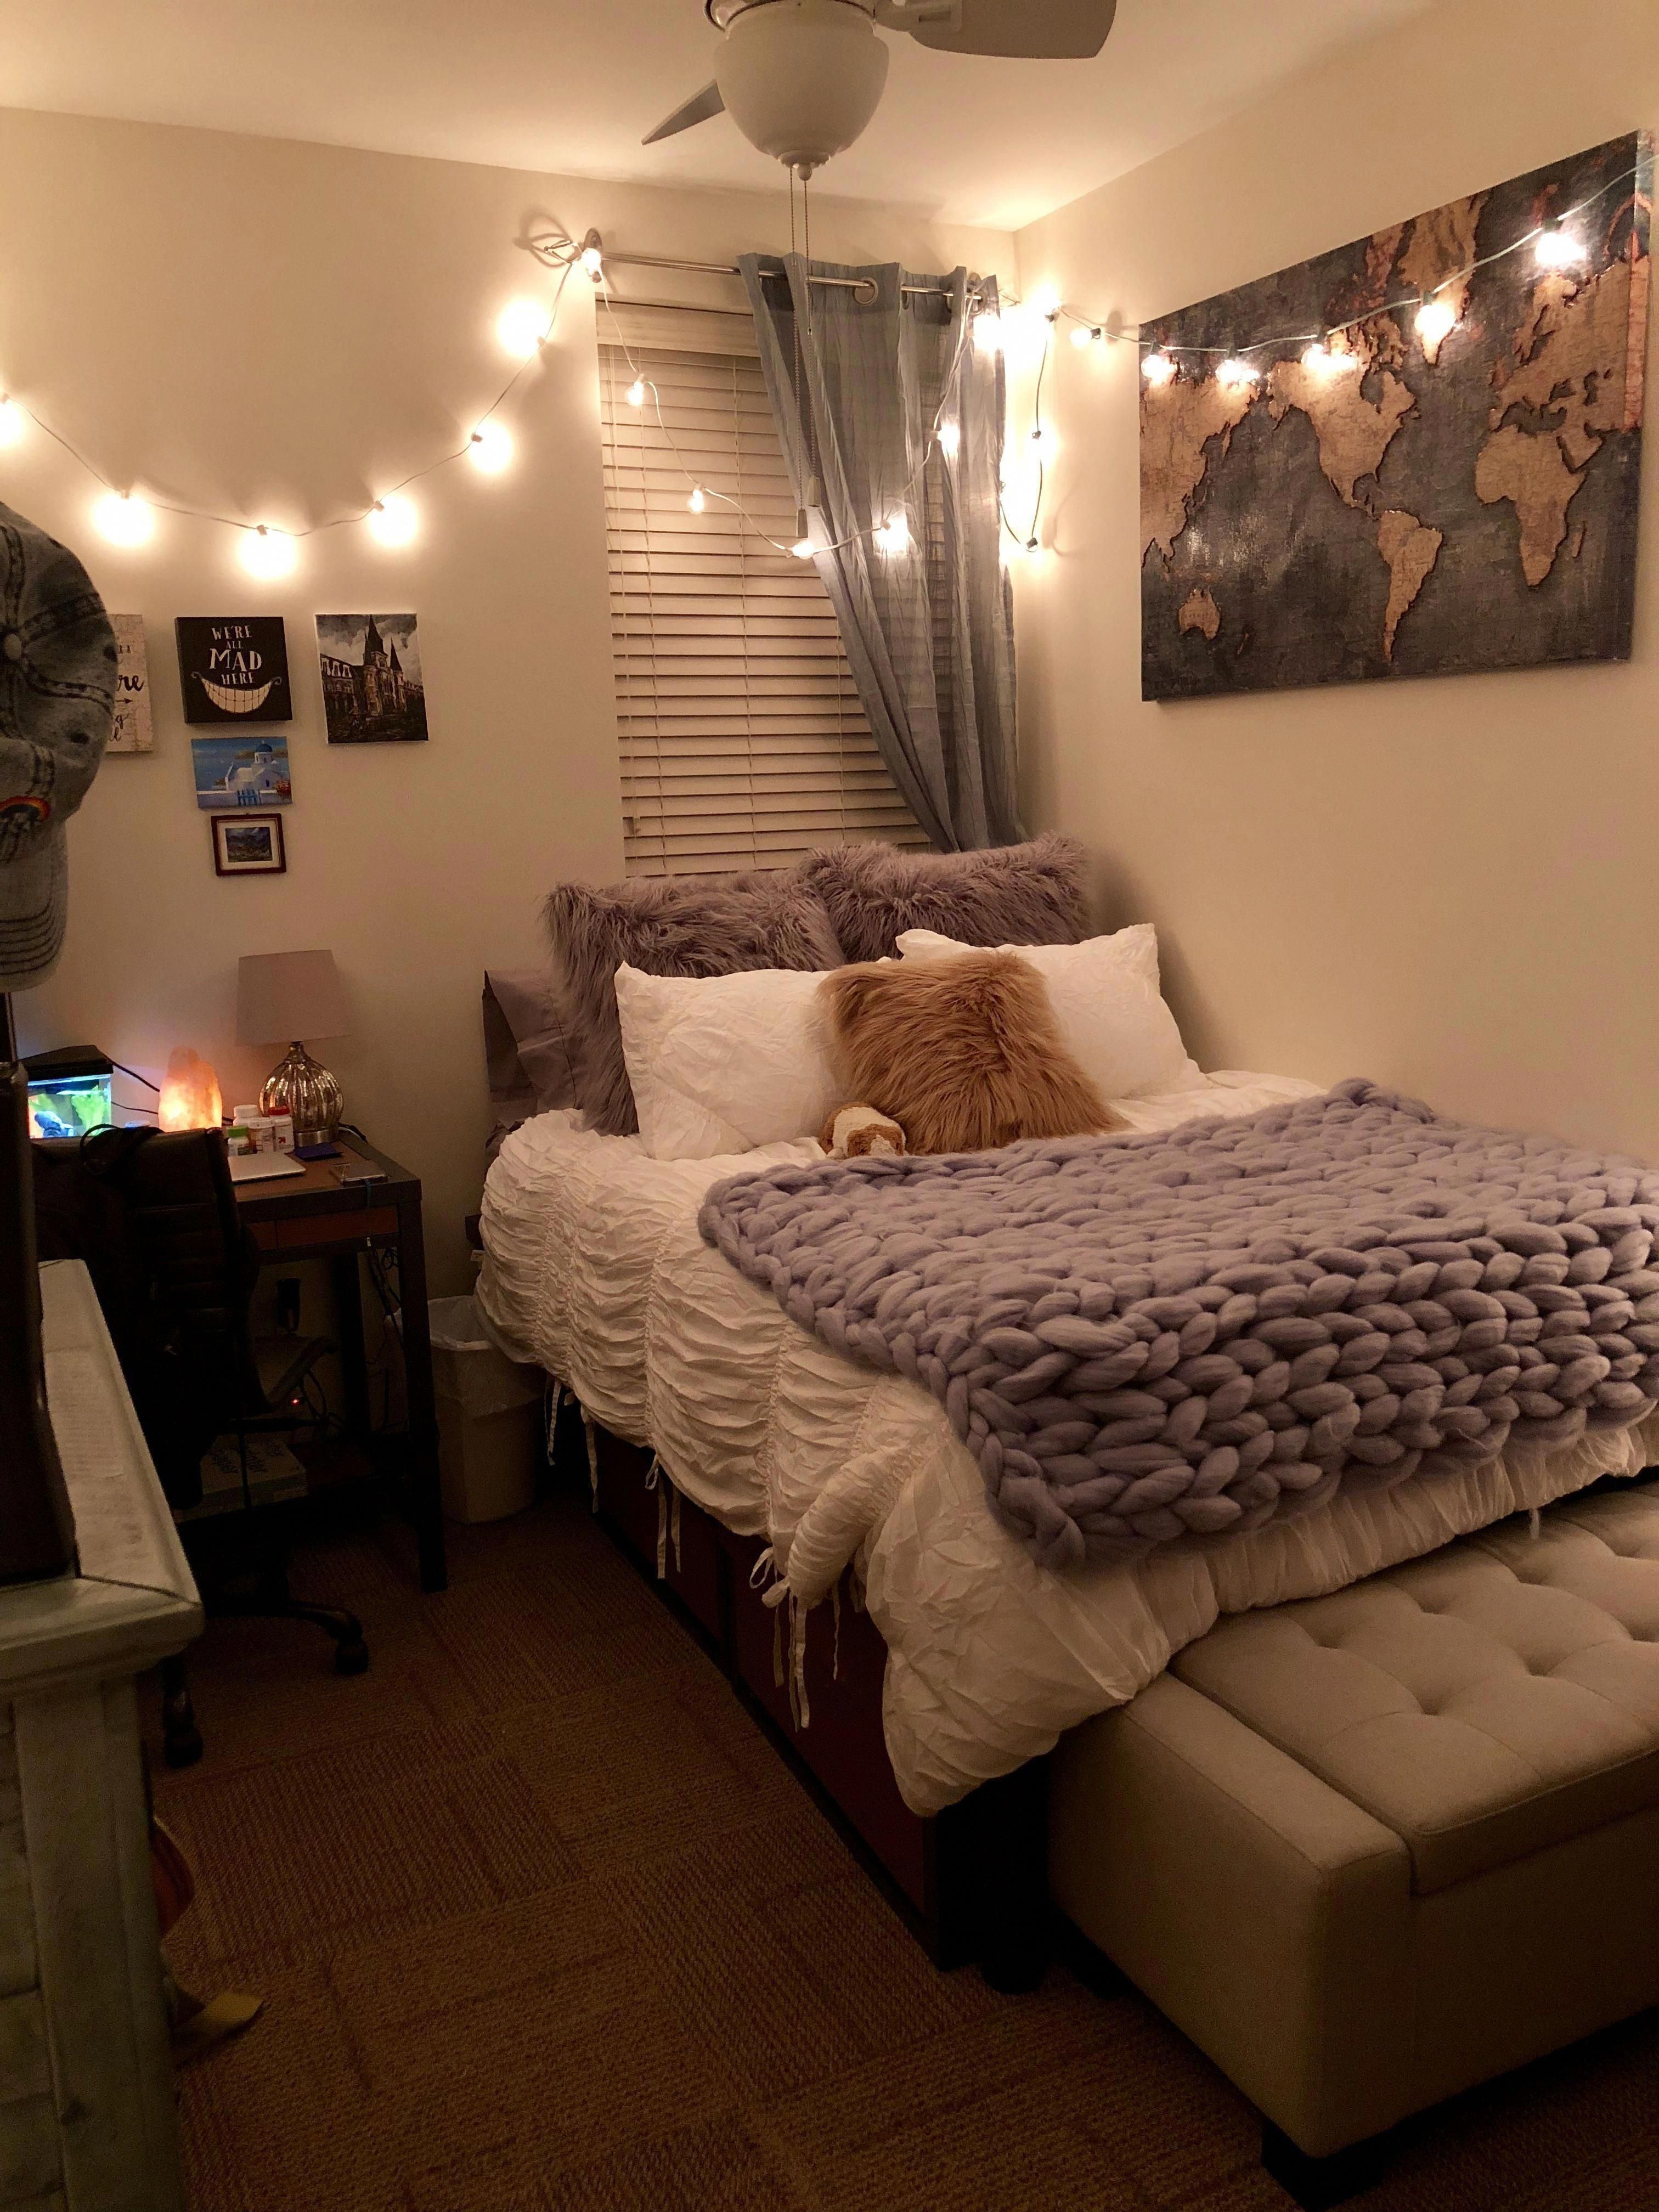 Parents, Stop Decorating Your Kid's Freshman Dorm With Fluffy Rugs and Big-Screen TVs -   diy Home Decor dorm